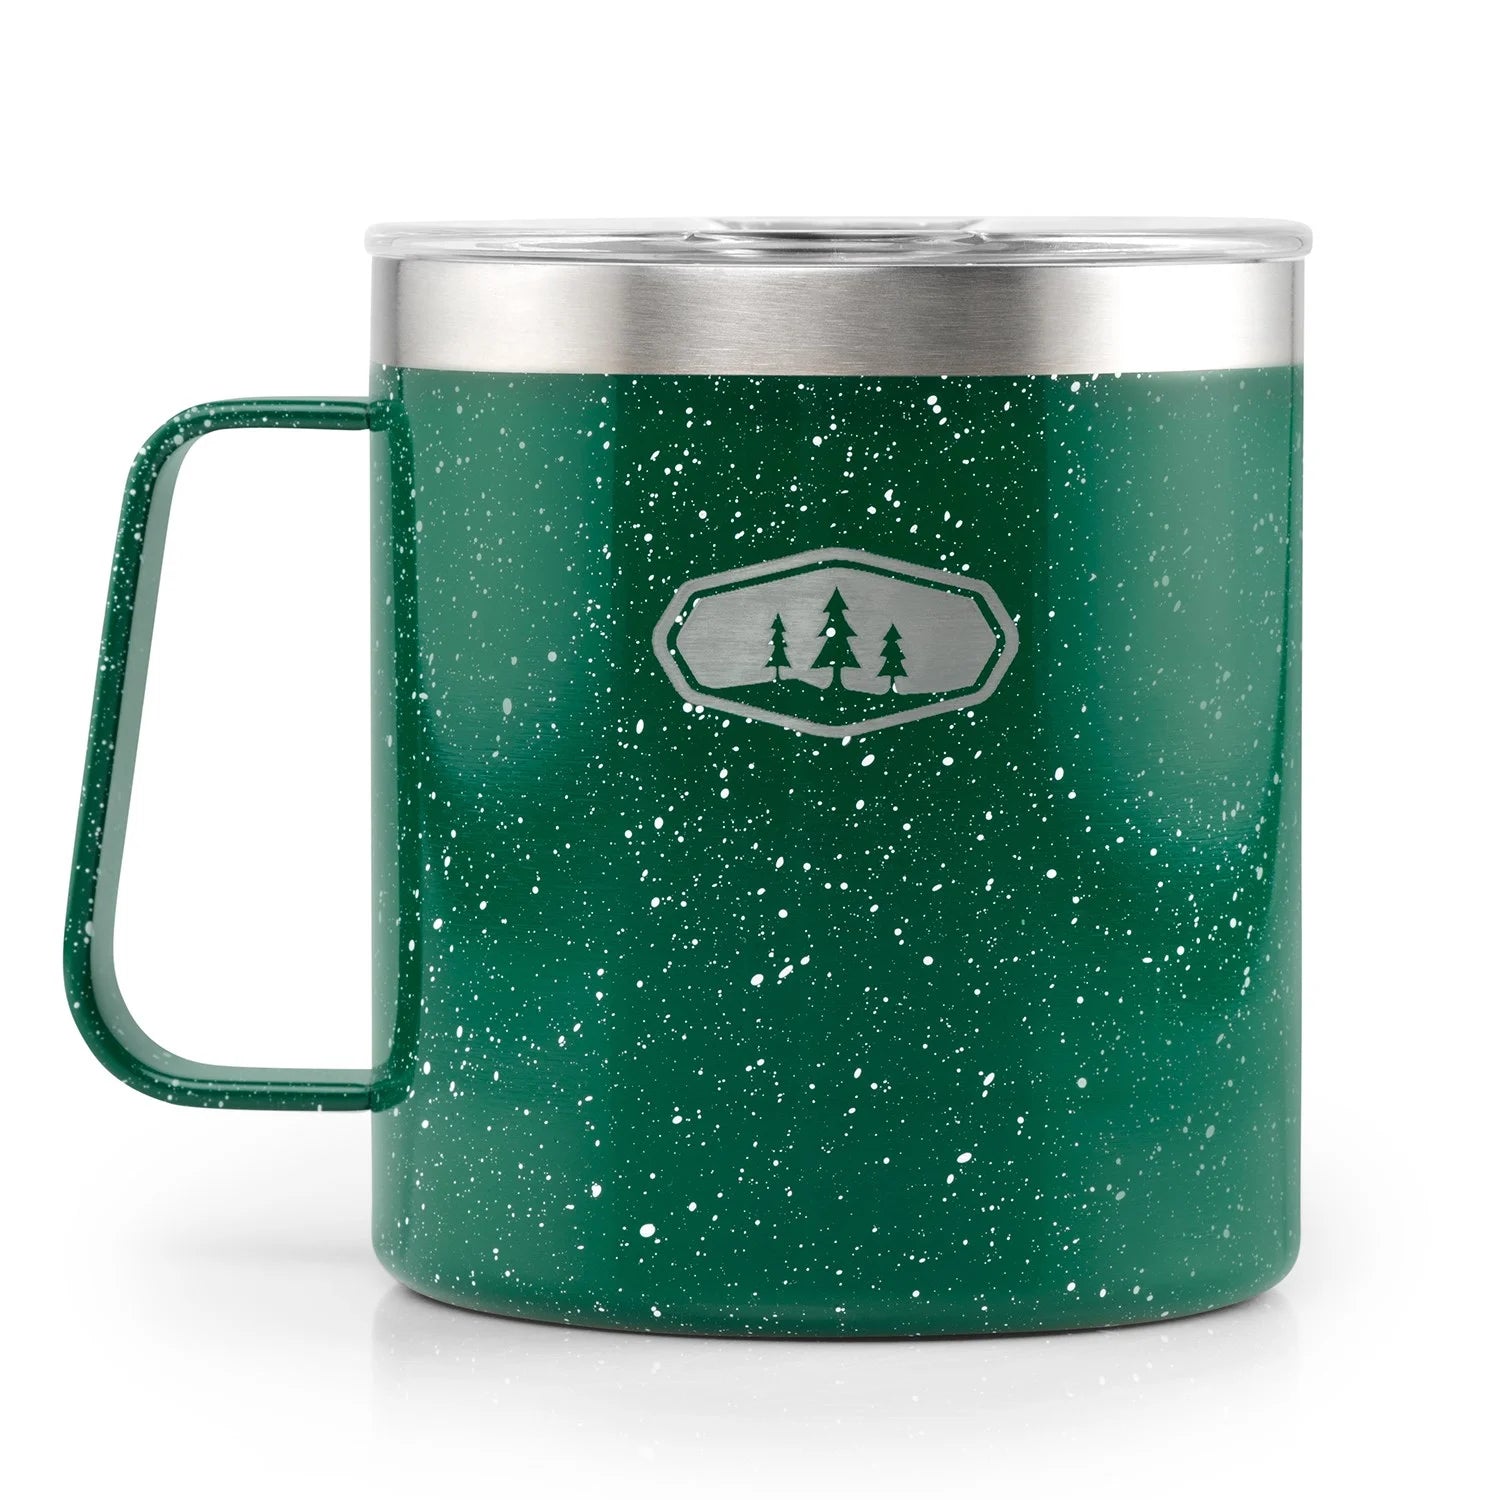 GSI Glacier Stainless Steel Camp Cup 15oz